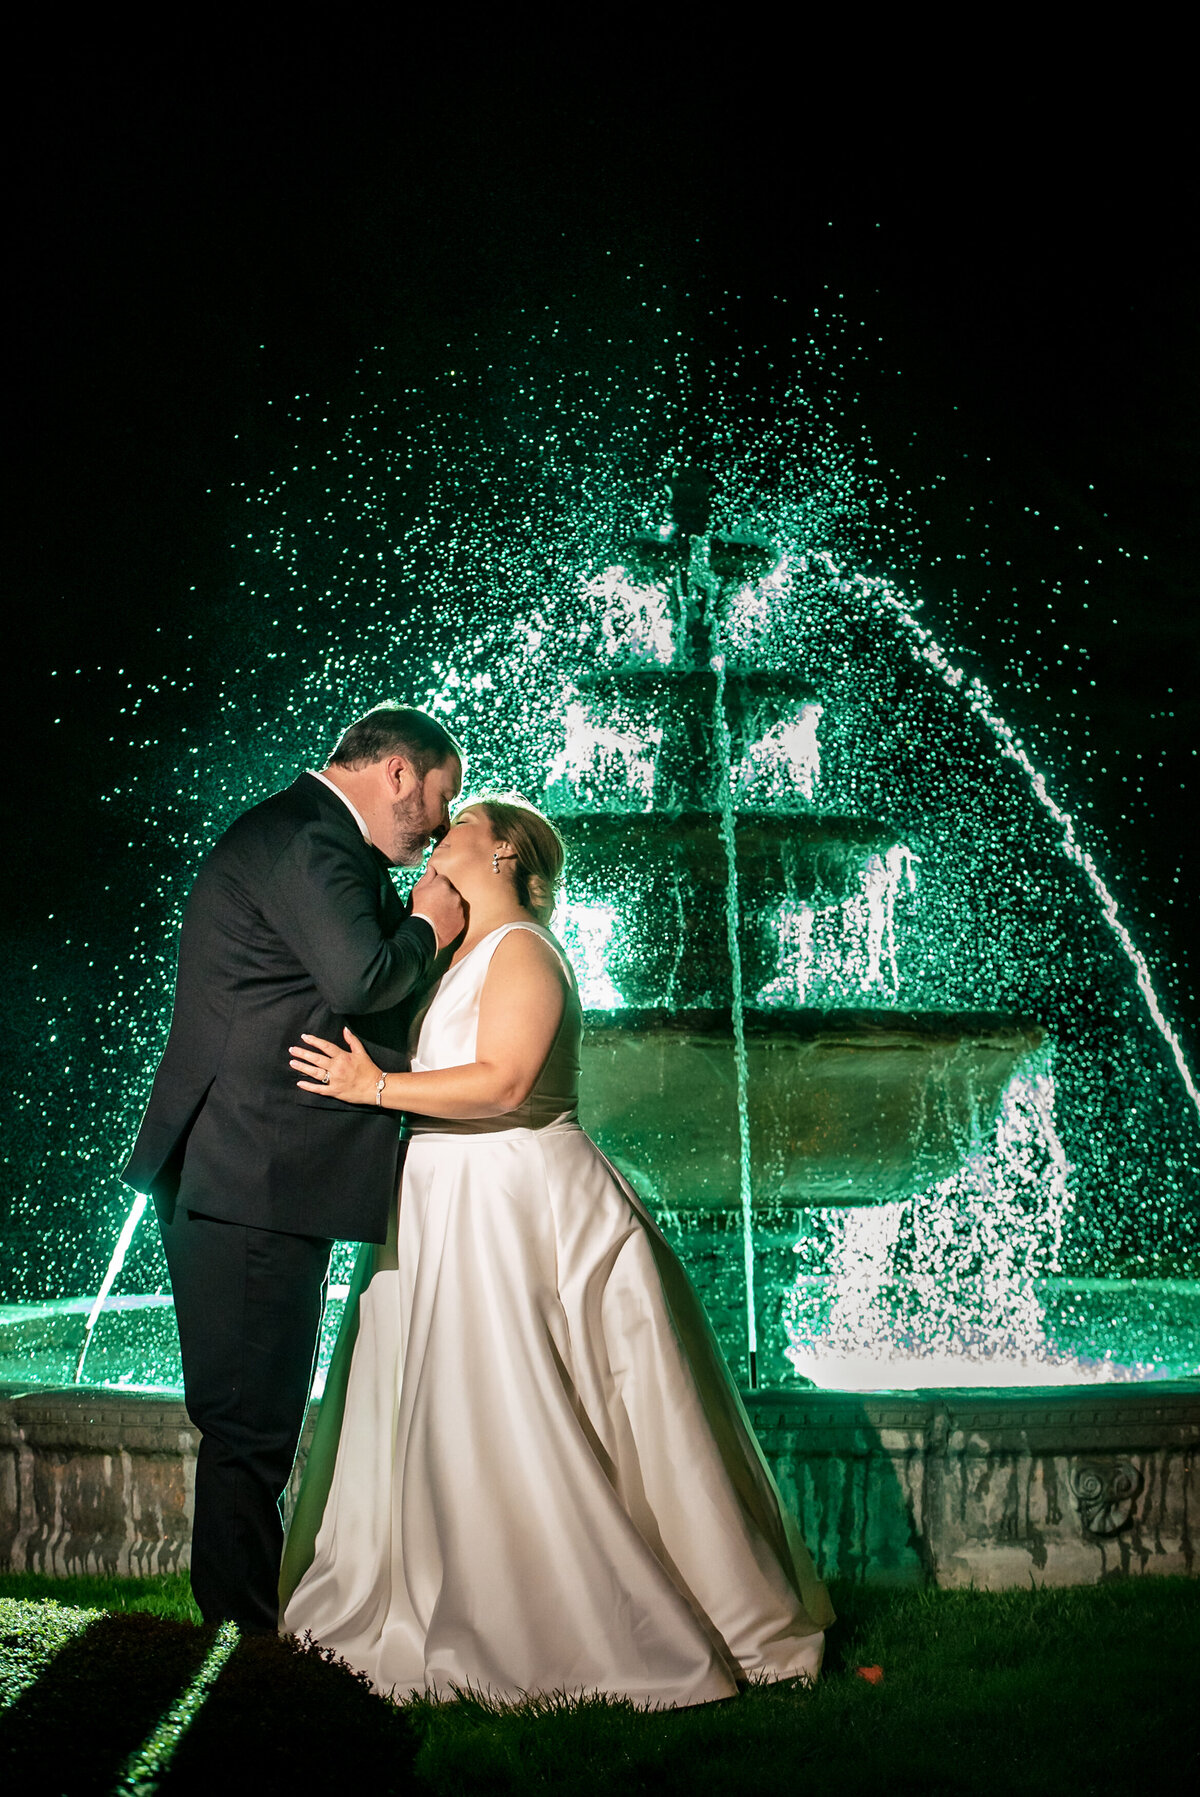 A nighttime portrait of a bride and groom kissing in front of a lit up green fountain at The Club at Longview by Charlotte wedding photographers DeLong Photography